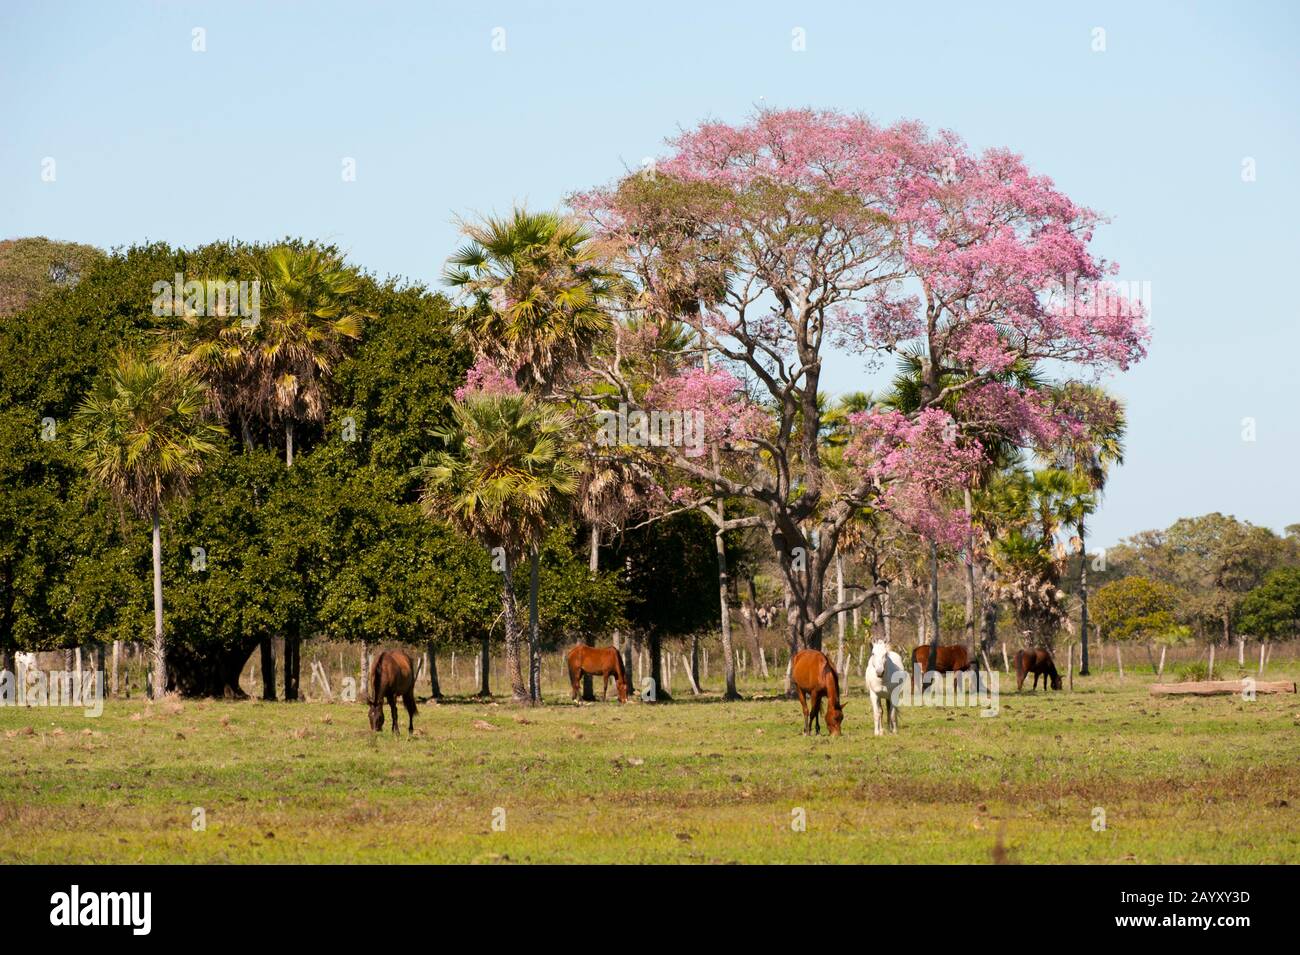 A flowering Pink trumpet tree (Tabebuia heterophylla) and horses at Caiman Ranch in the Southern Pantanal in Brazil. Stock Photo